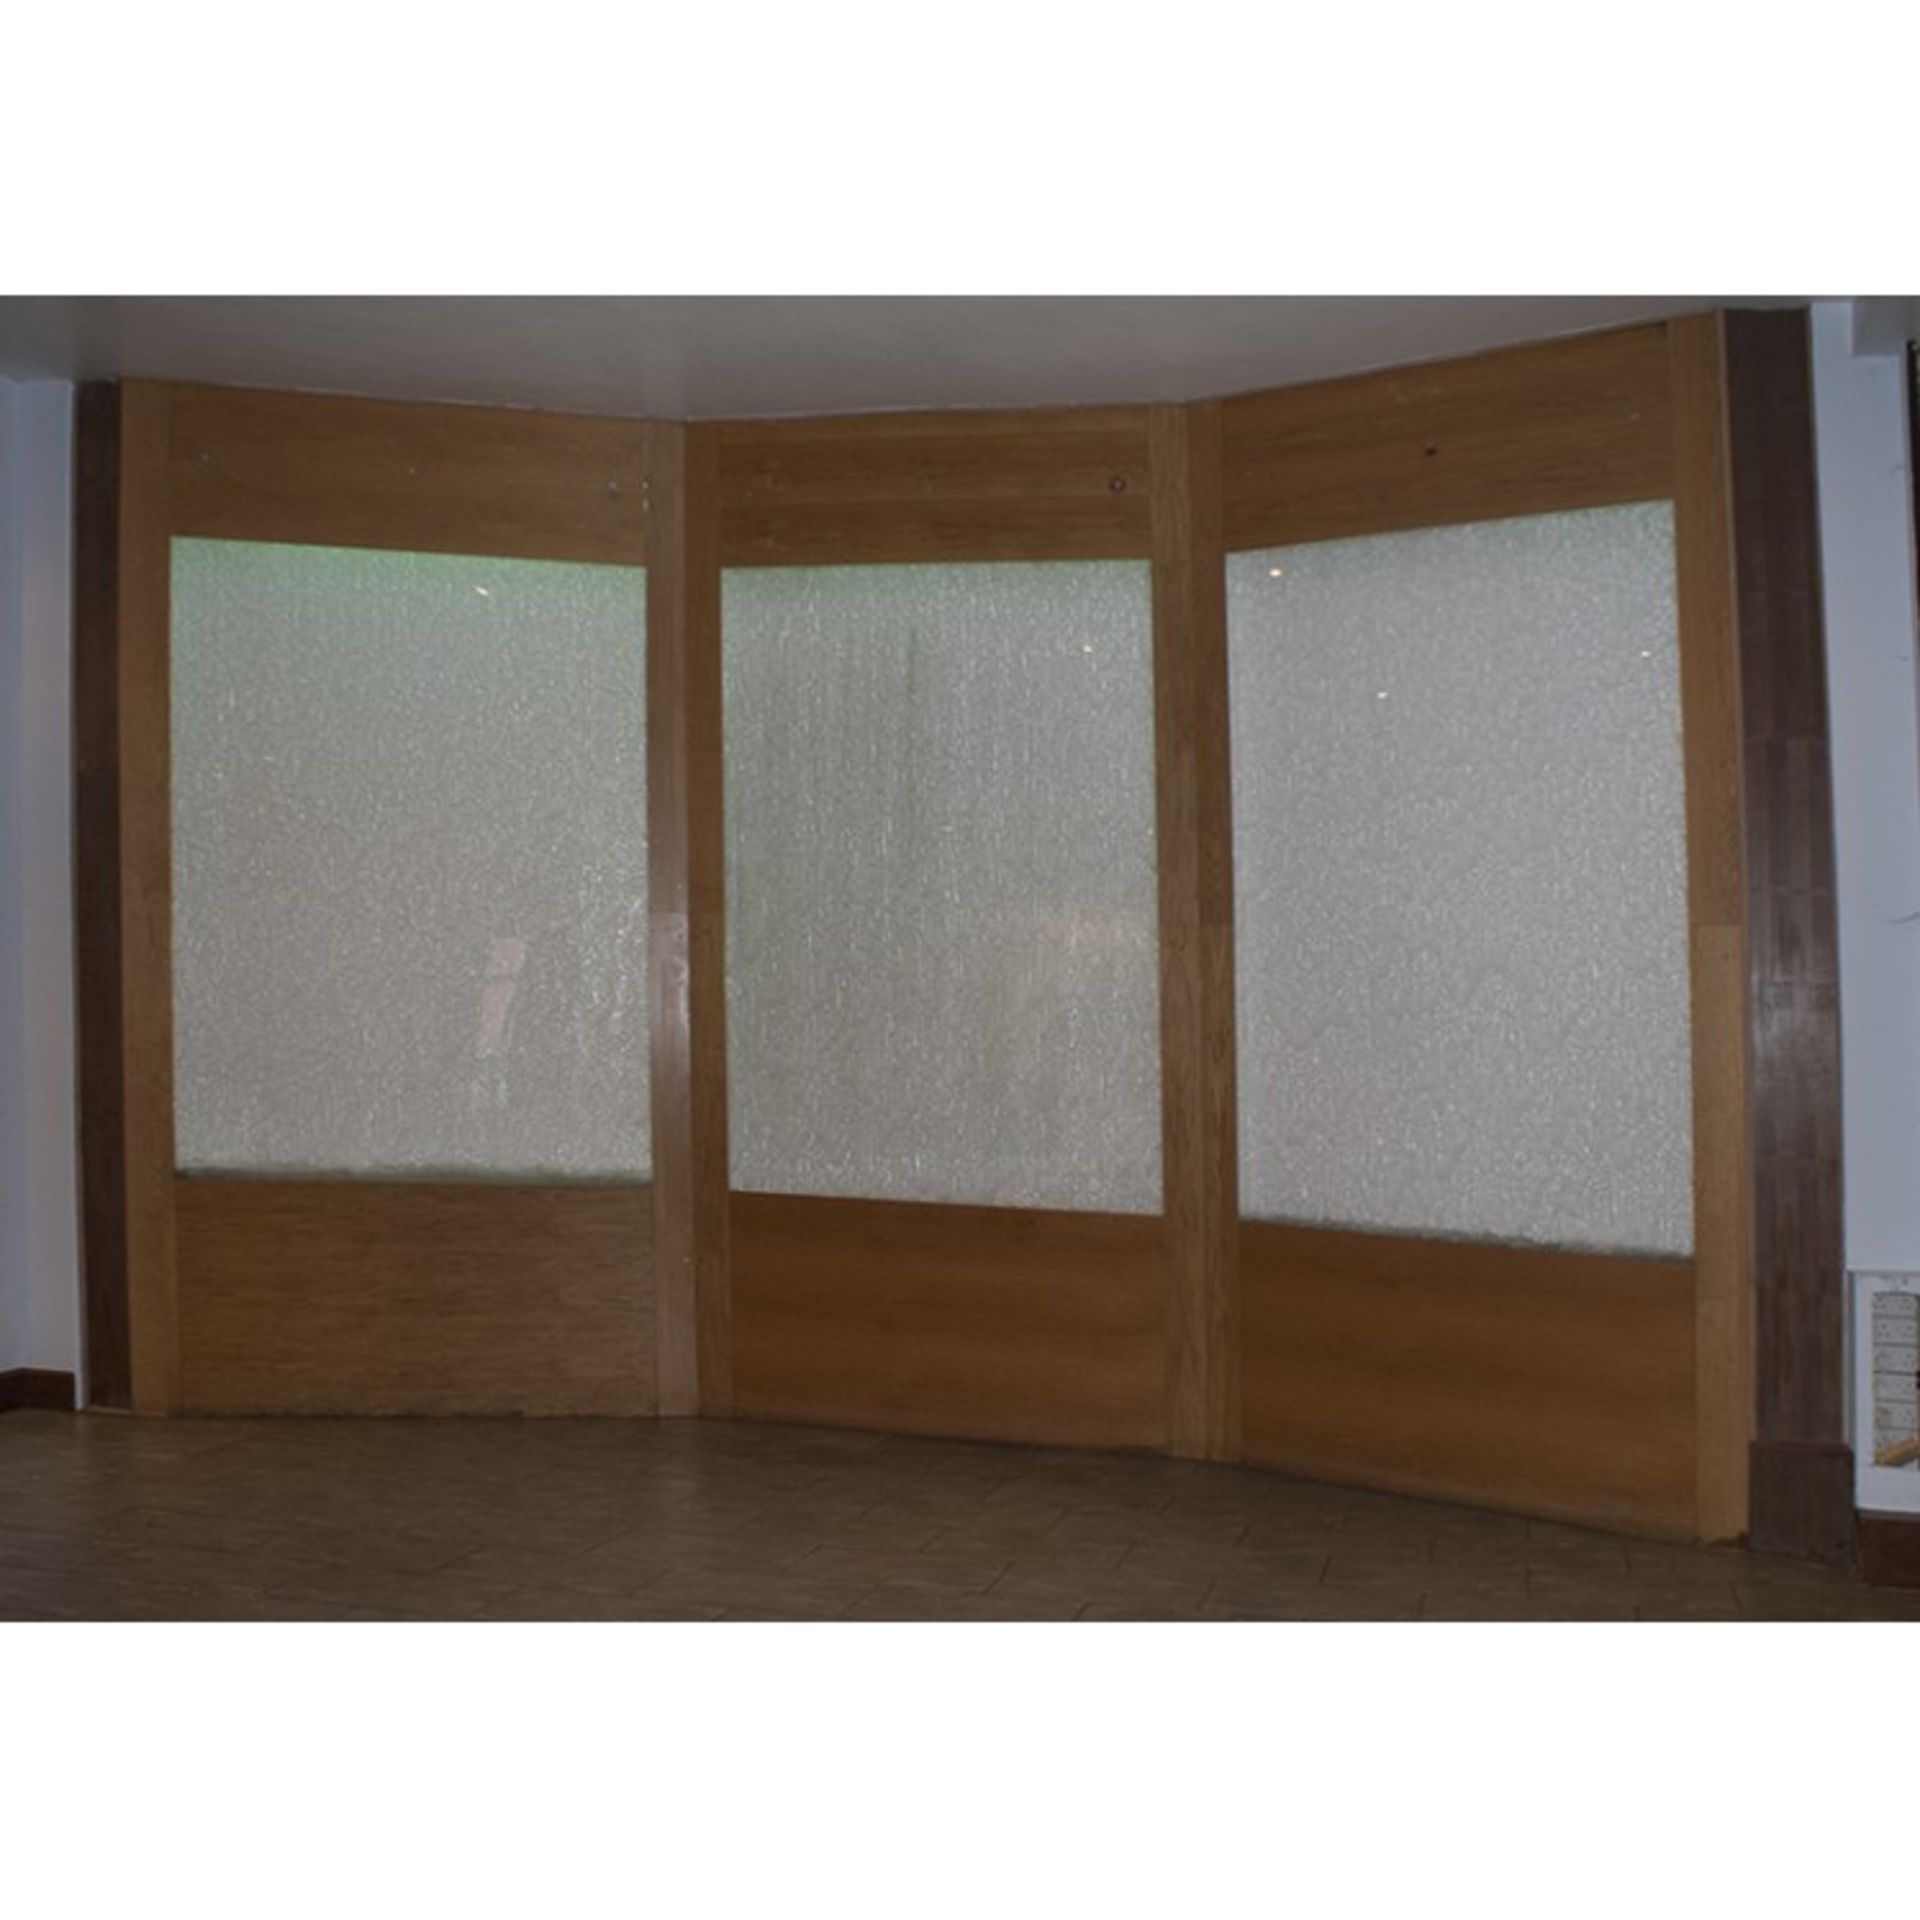 3 x Commercial Waterfall Enclosure

Including the enclosure & pumps to move the water. What you